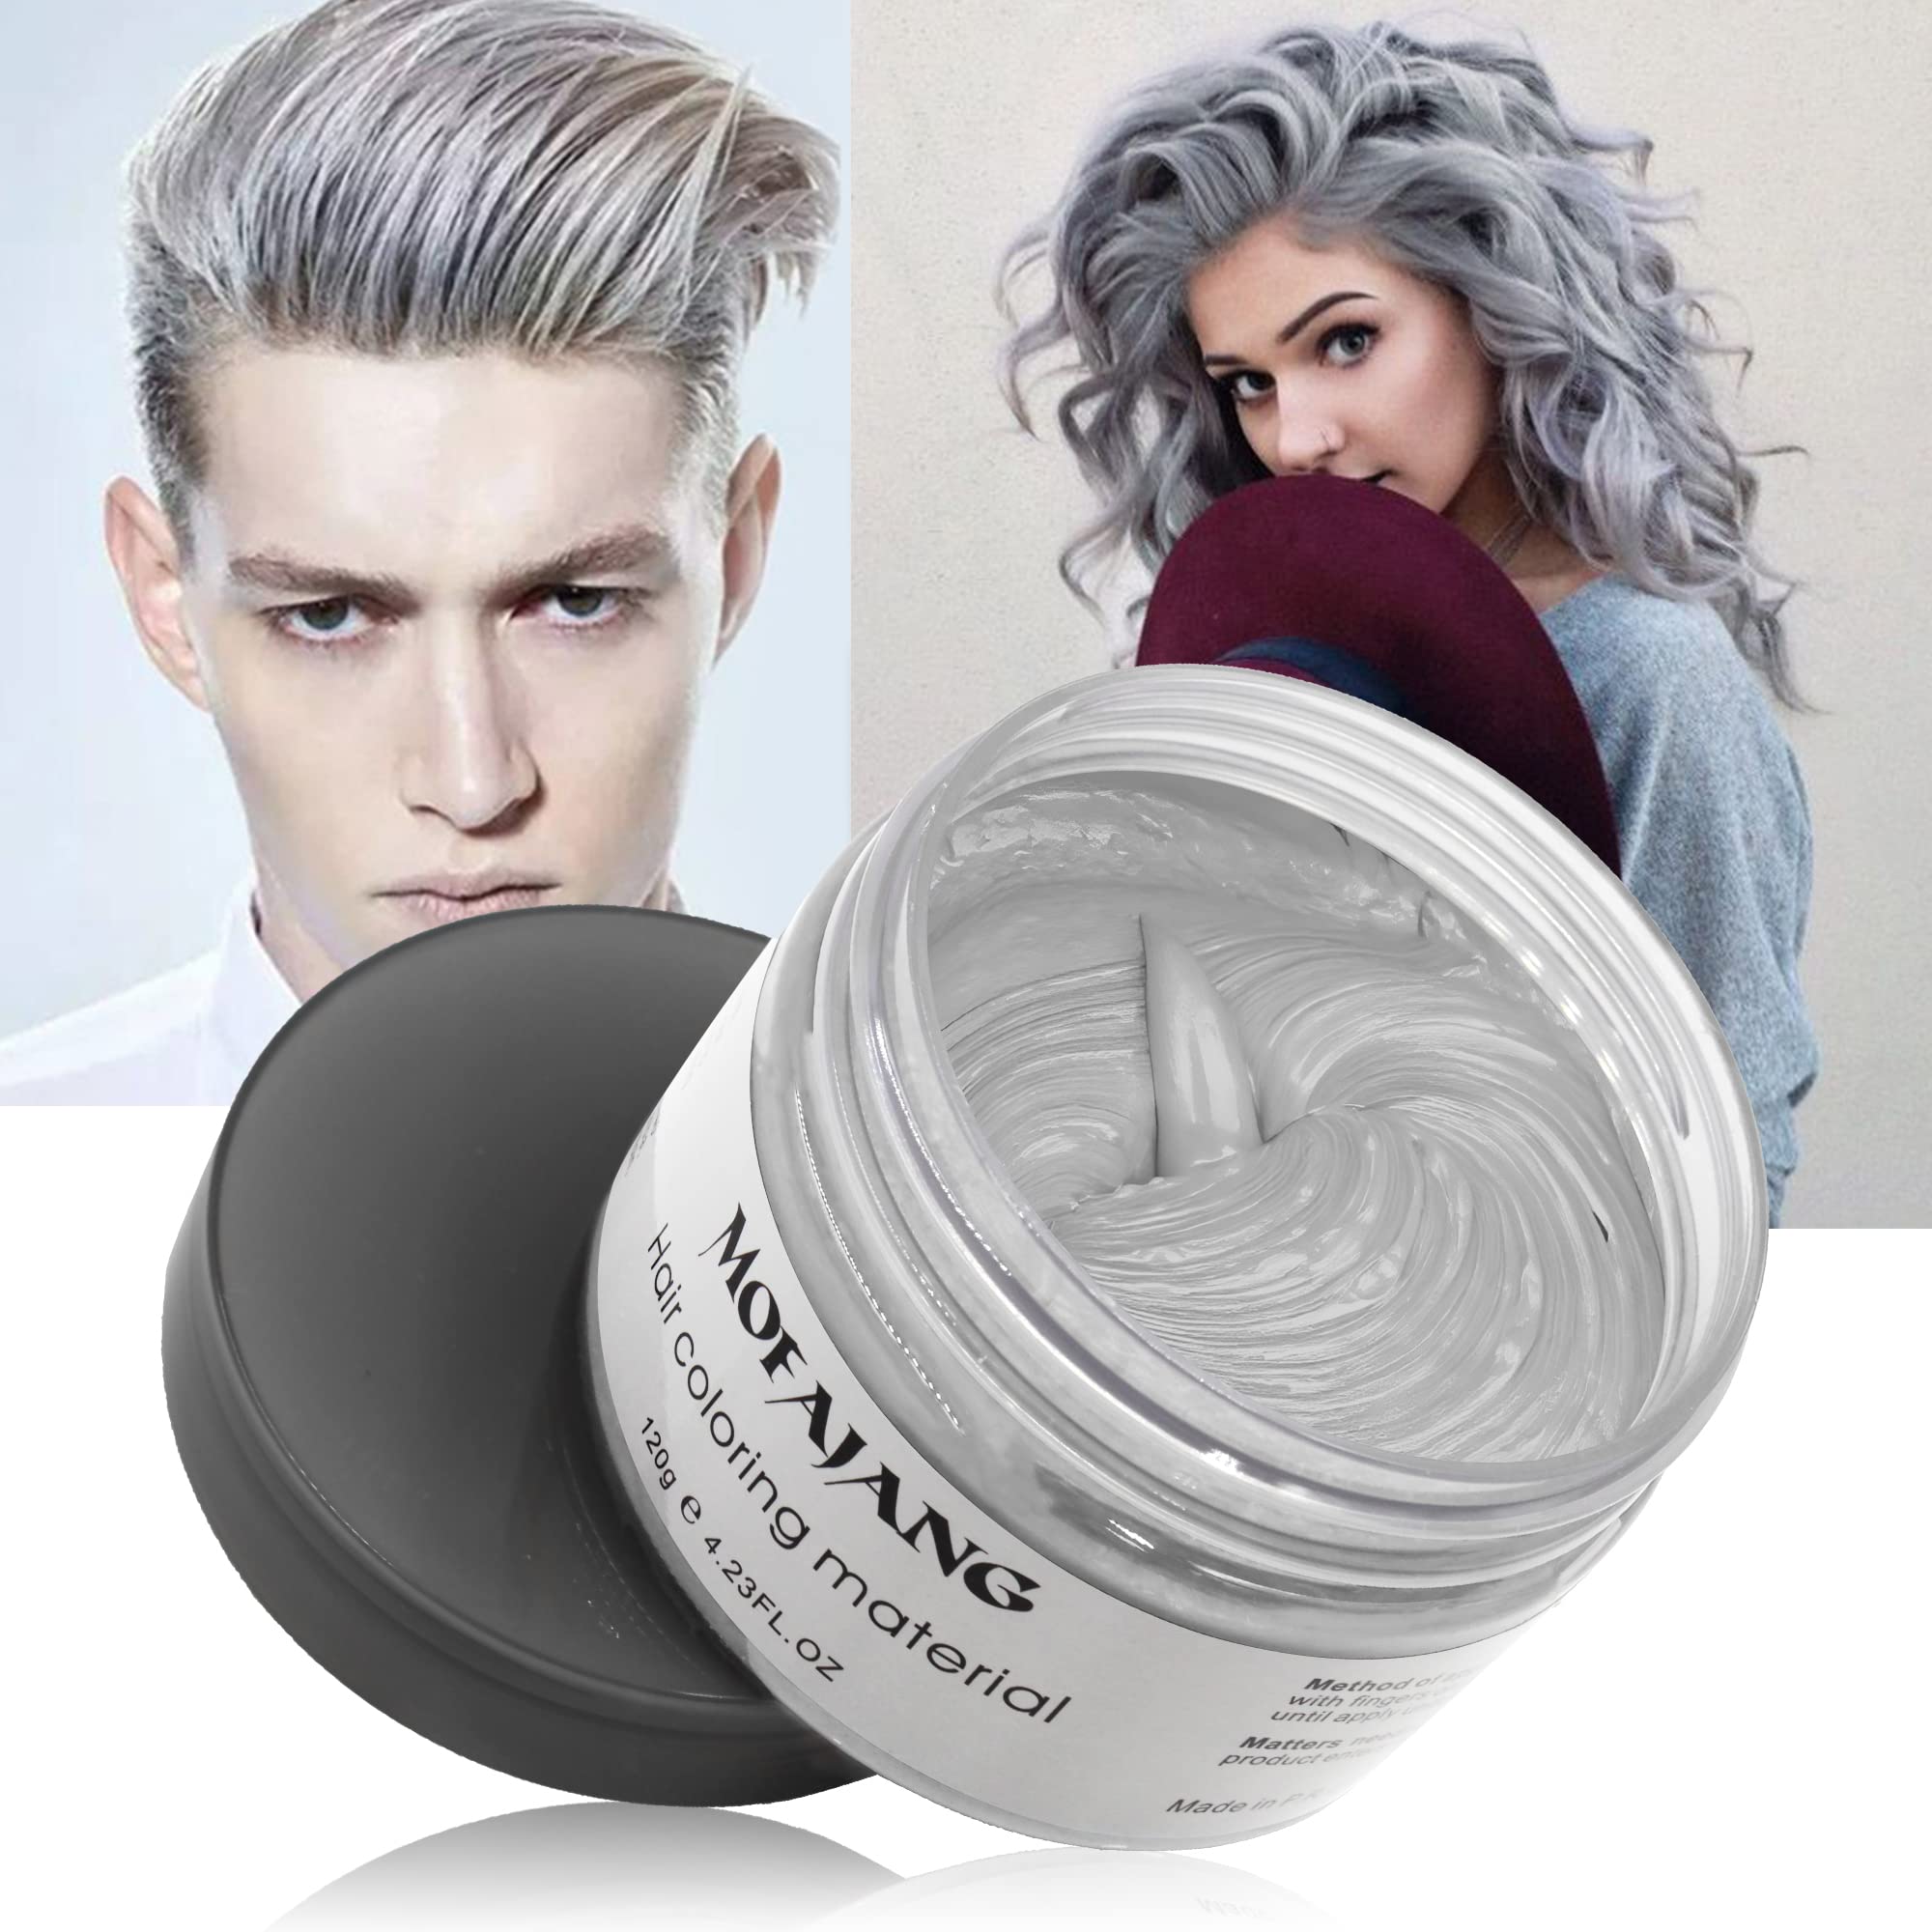 Silver Gray Temporary Hair Dye Wax - Instant Colored Hair Dye Wax, Natural  Hair Pomades Hairstyle Cream for Men Women Party, Festival, Cosplay 